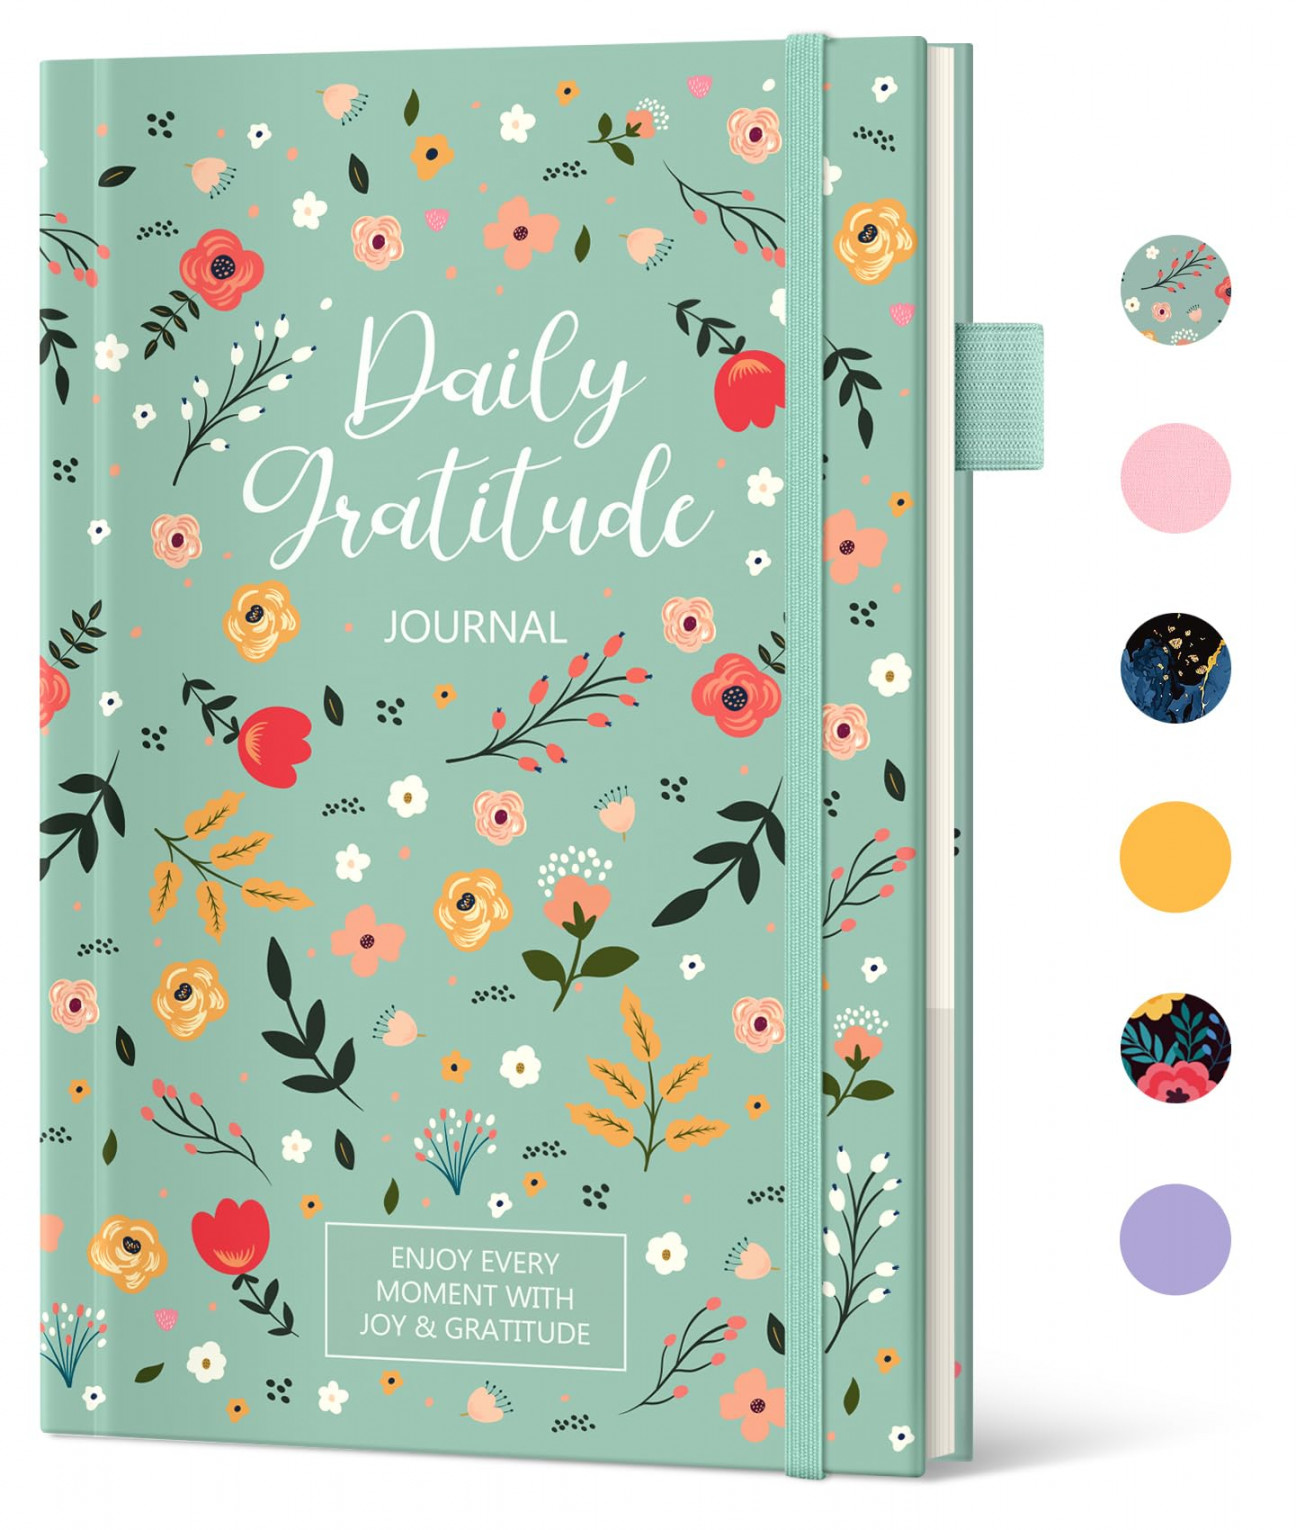 Gratitude Journal Notebook for Women & Men, Daily Gratitude Journal with Prompts, Cultivate Thankfulness, Boost Happiness, and Improve Well Being